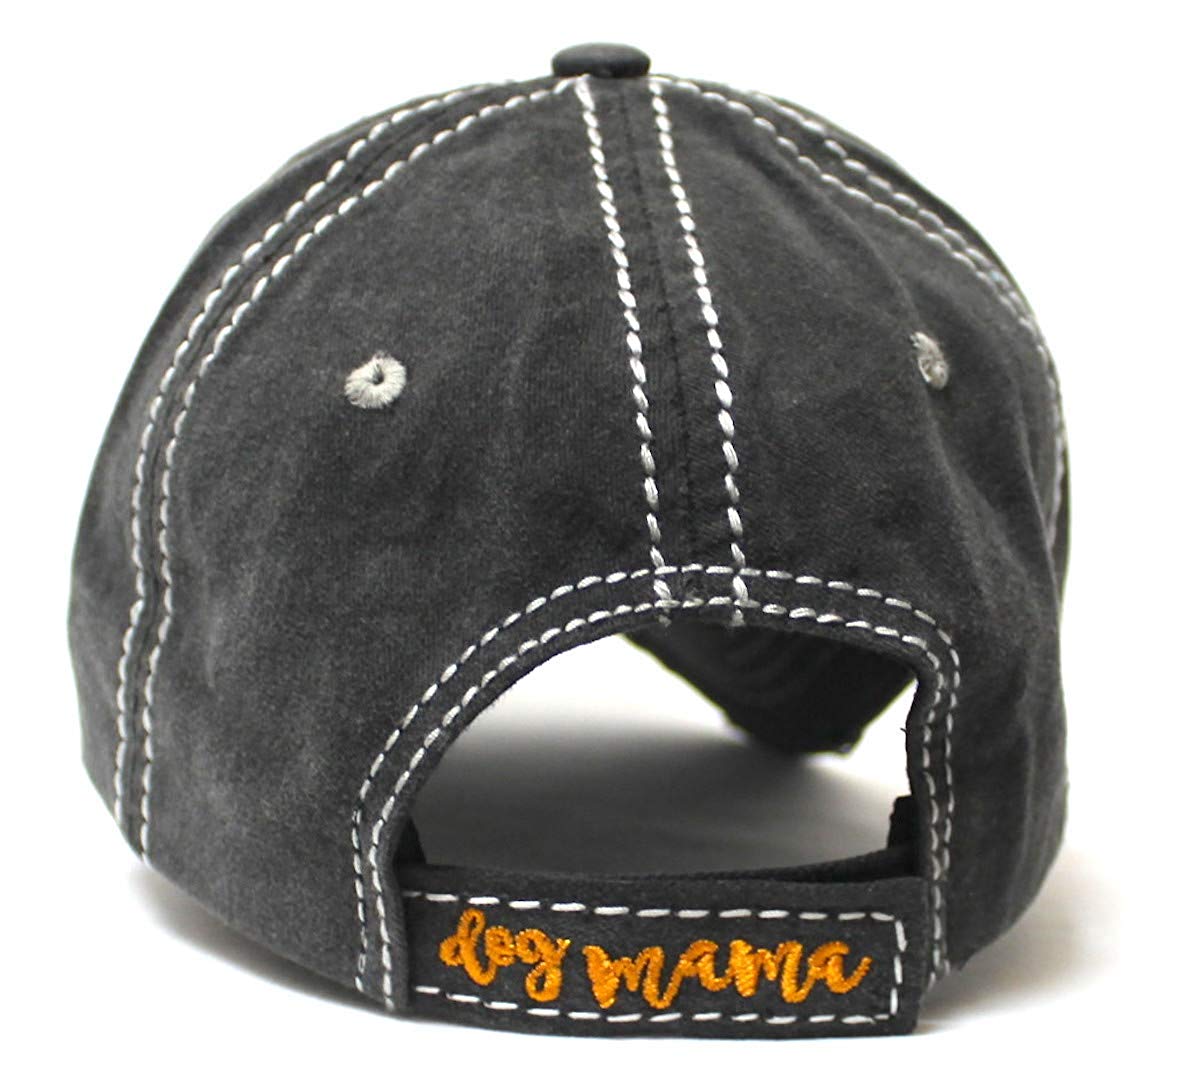 Women's Ballcap Dog Mama Pug Face Patch Embroidery Unconstructed Hat, Vintage Black - Caps 'N Vintage 